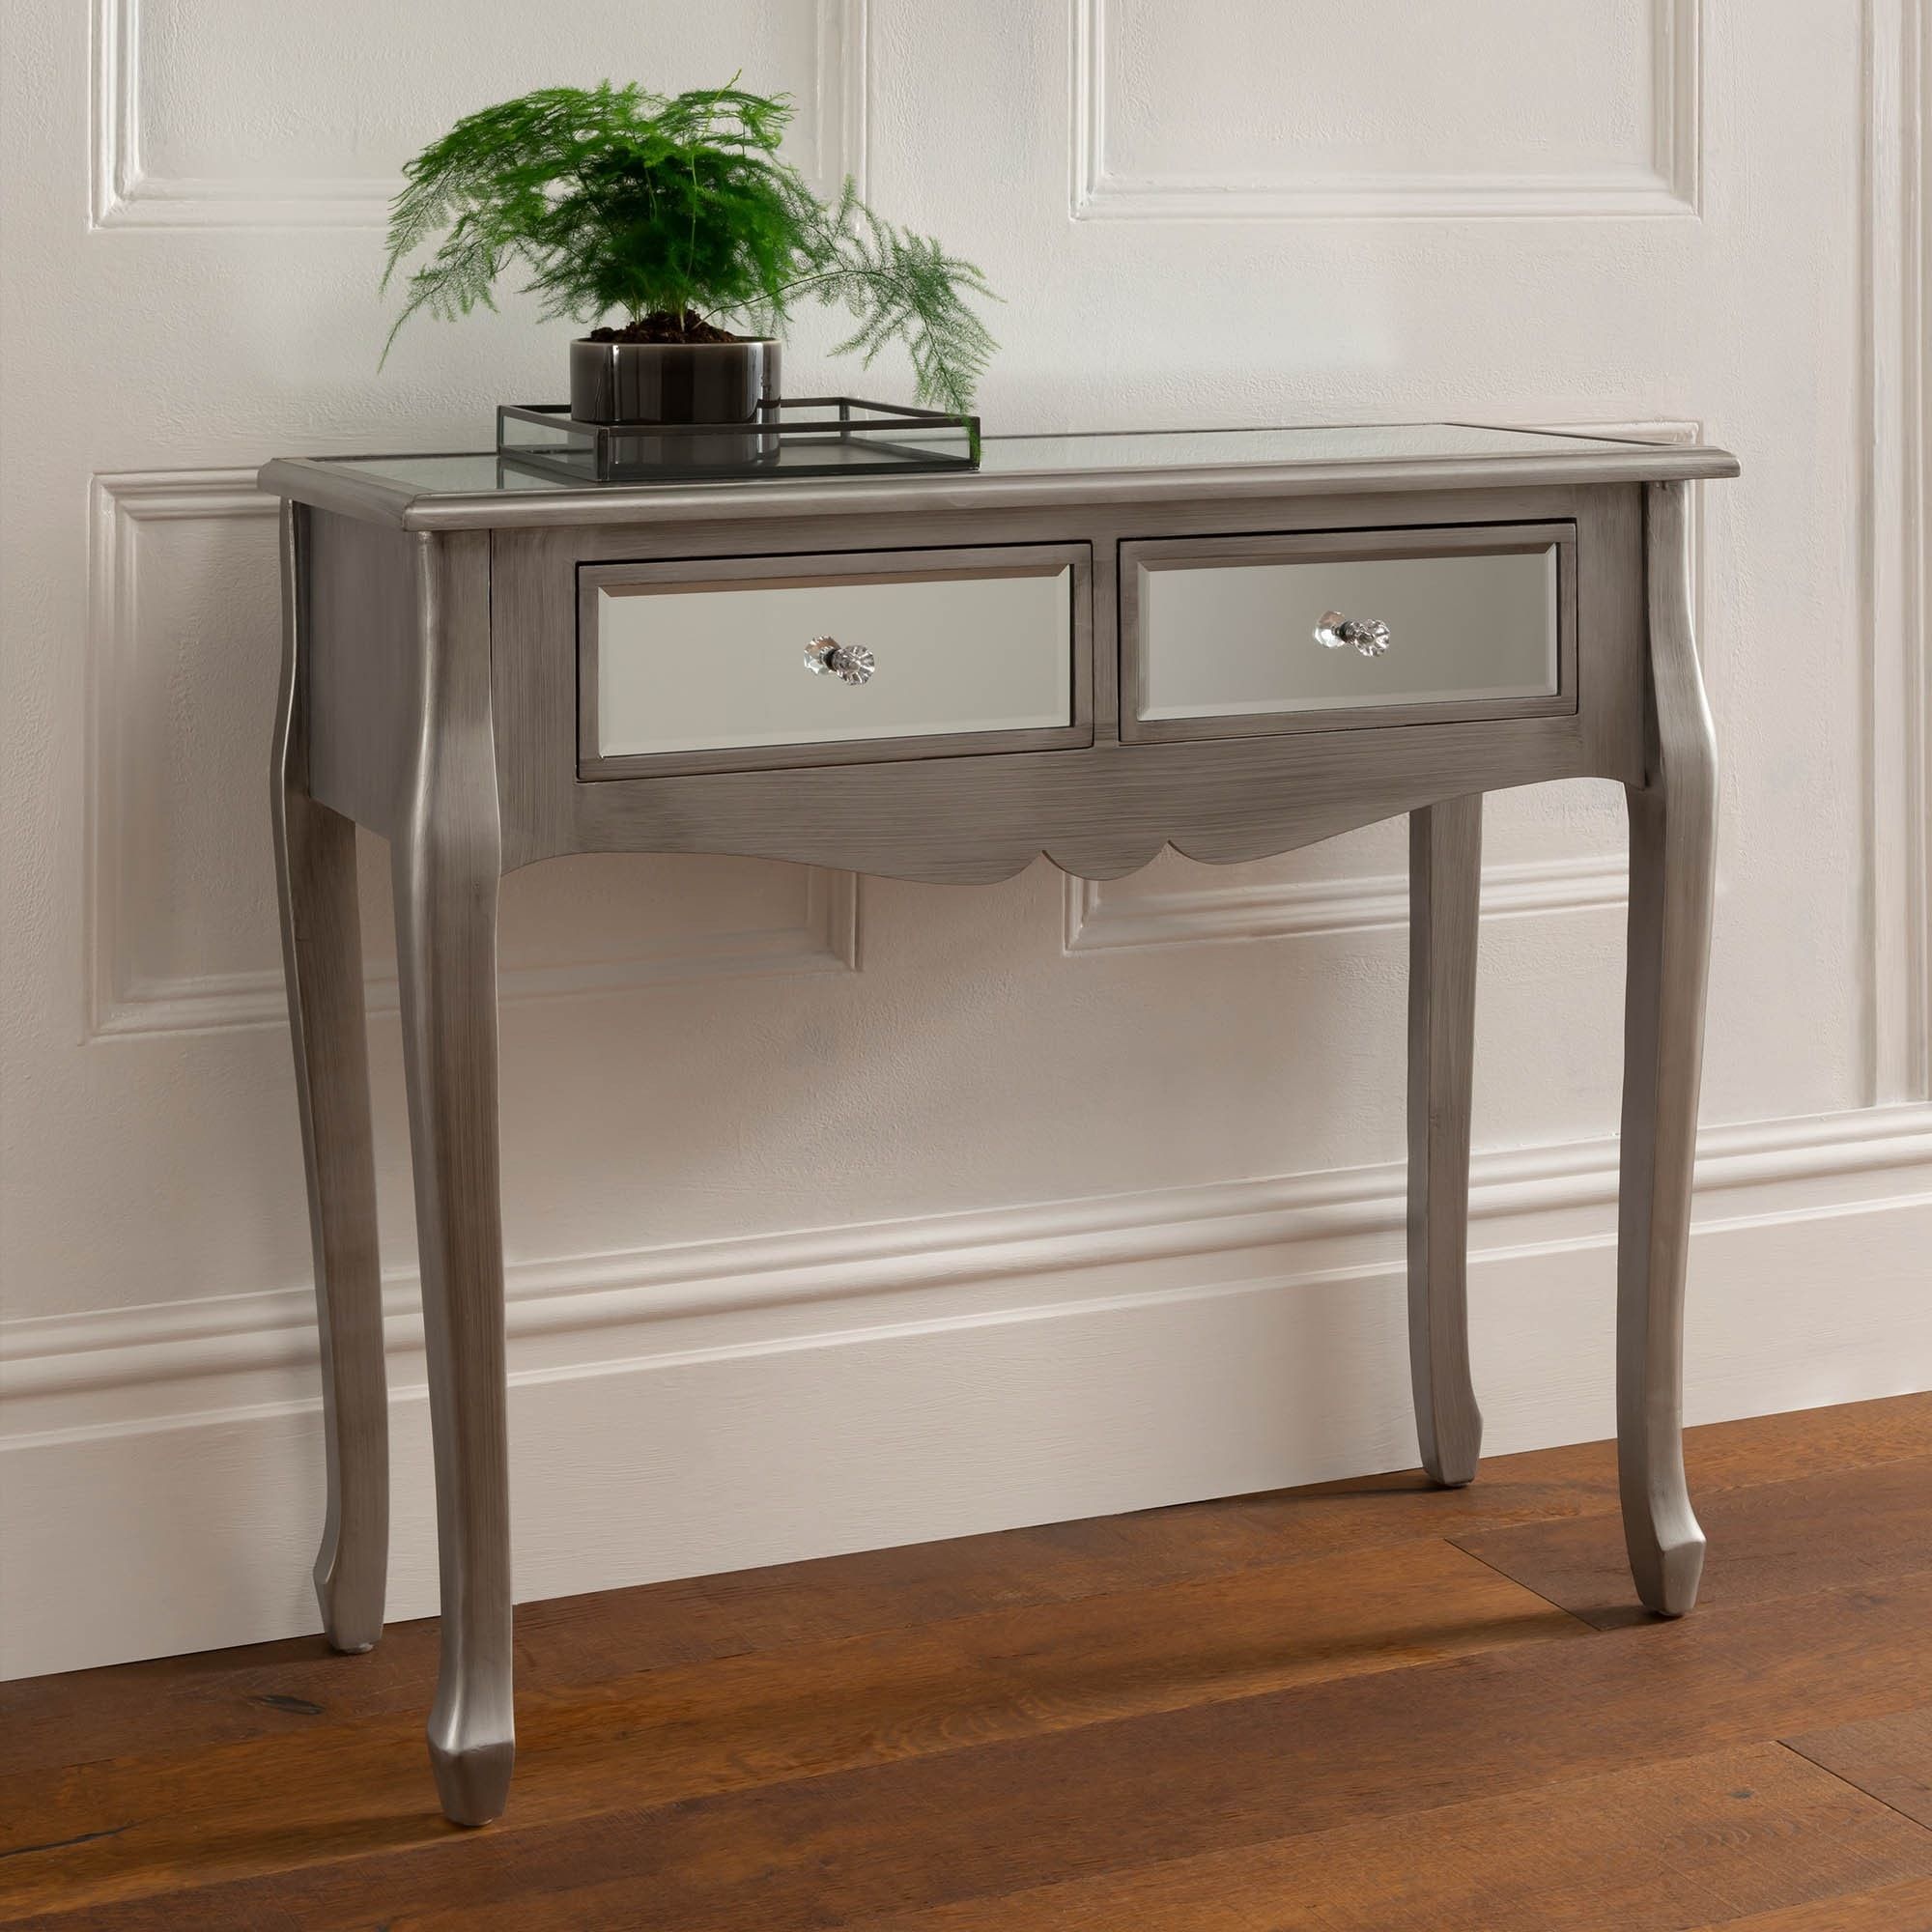 Antique French Style Silver Console Table | Bedroom Furniture Pertaining To Mirrored And Silver Console Tables (View 8 of 20)